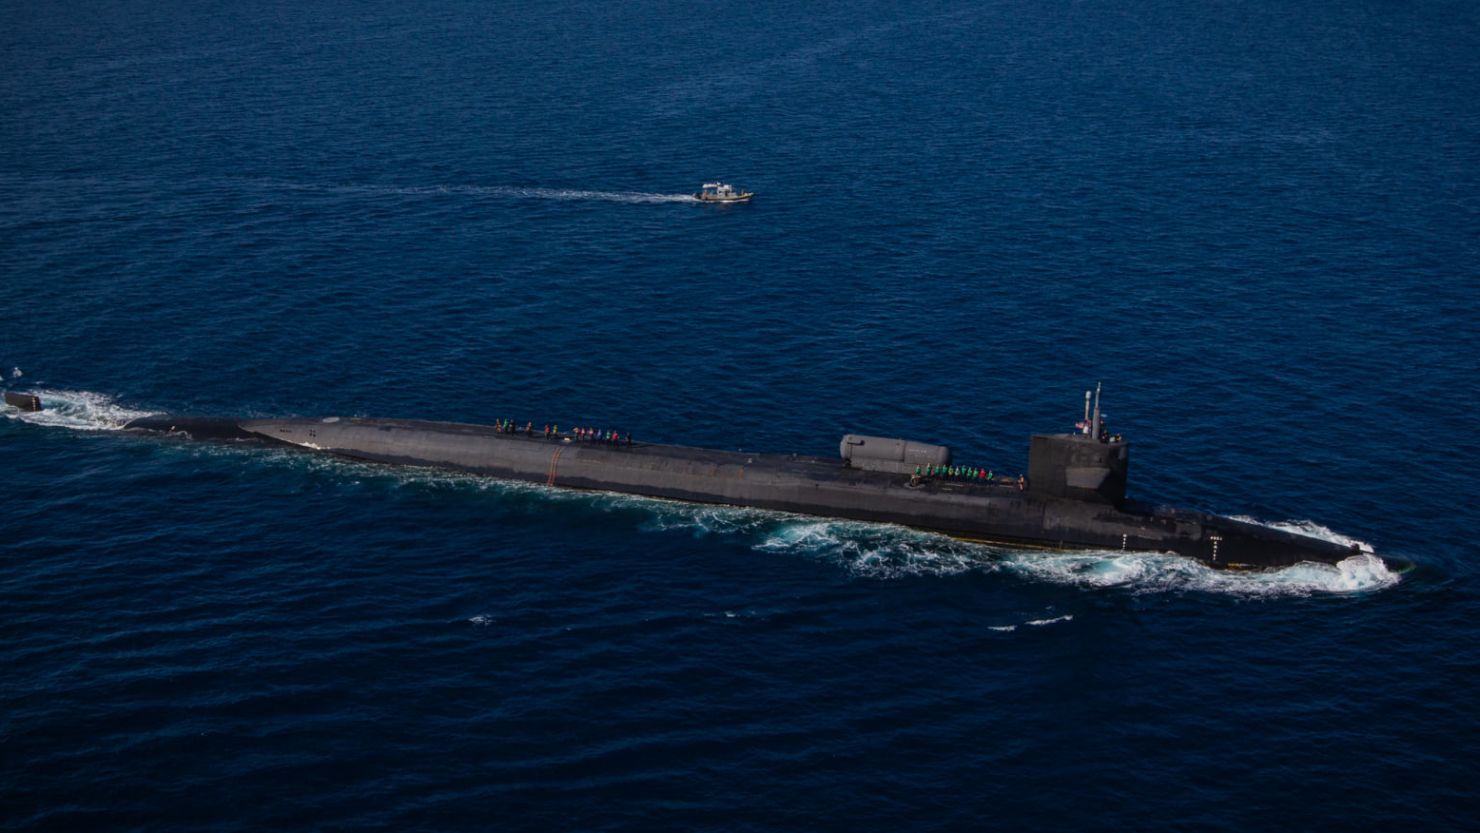 The guided-missile submarine USS Ohio rendezvous with a US Marines combat rubber raiding craft for an integration exercise off the coast of Okinawa, Japan this month.